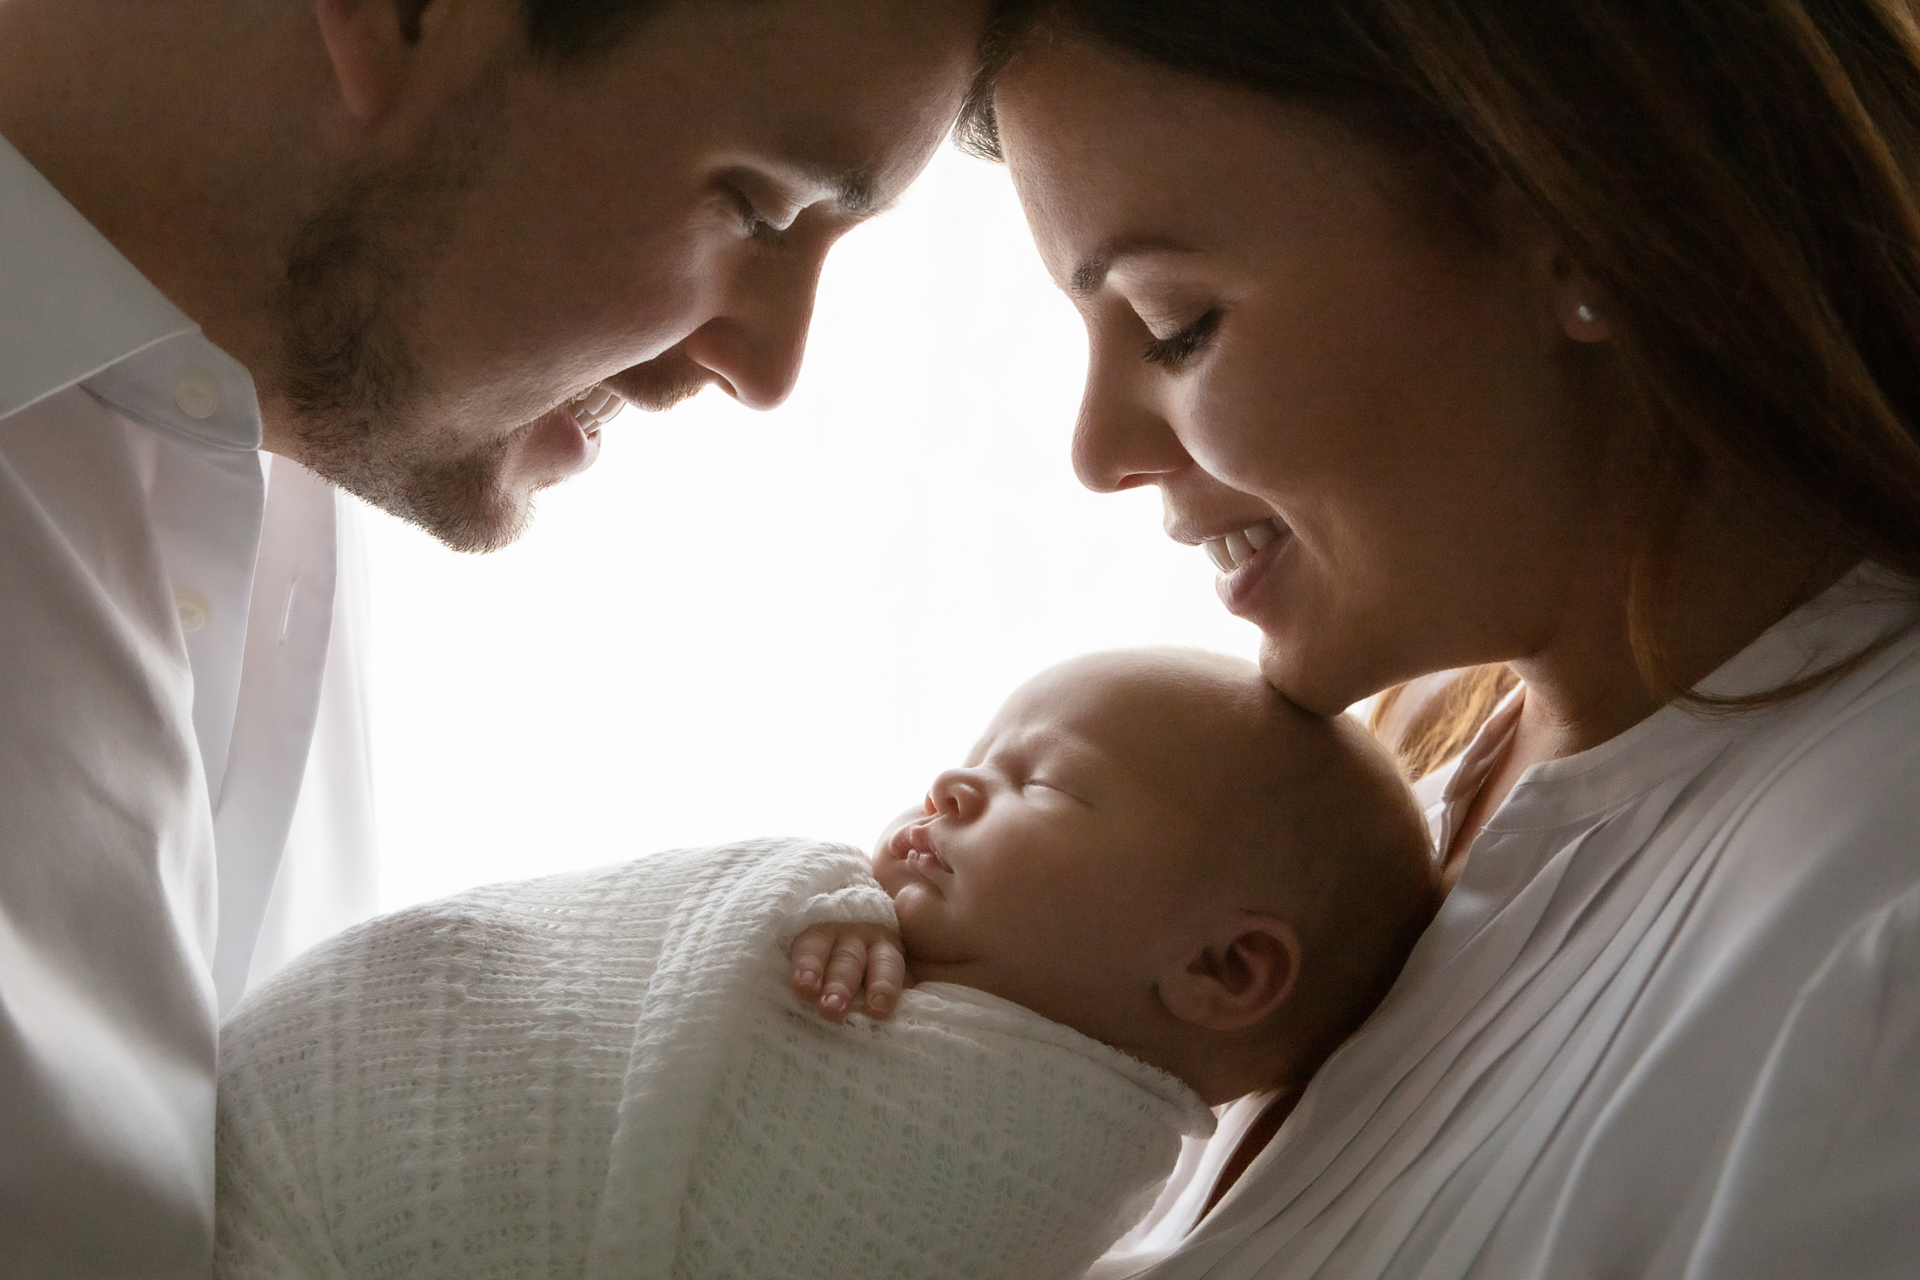 silhouetted, backlit family newborn image; dad, mom, and baby boy asleep with his hand peeking out from the swaddle